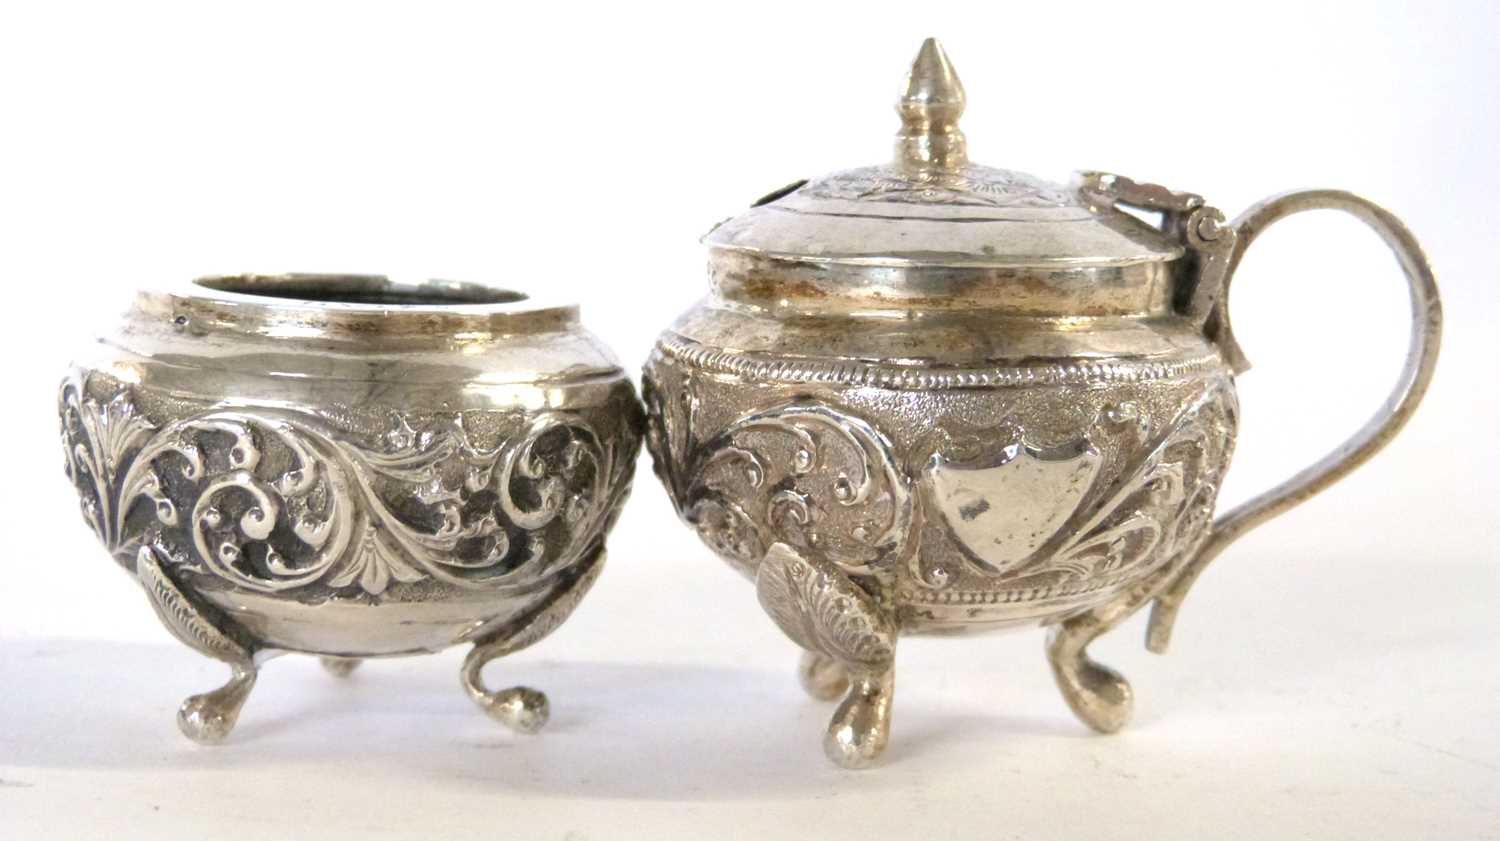 Antique 19th Century Indian silver condiment set featuring mustard pot and salt decorated in cutch